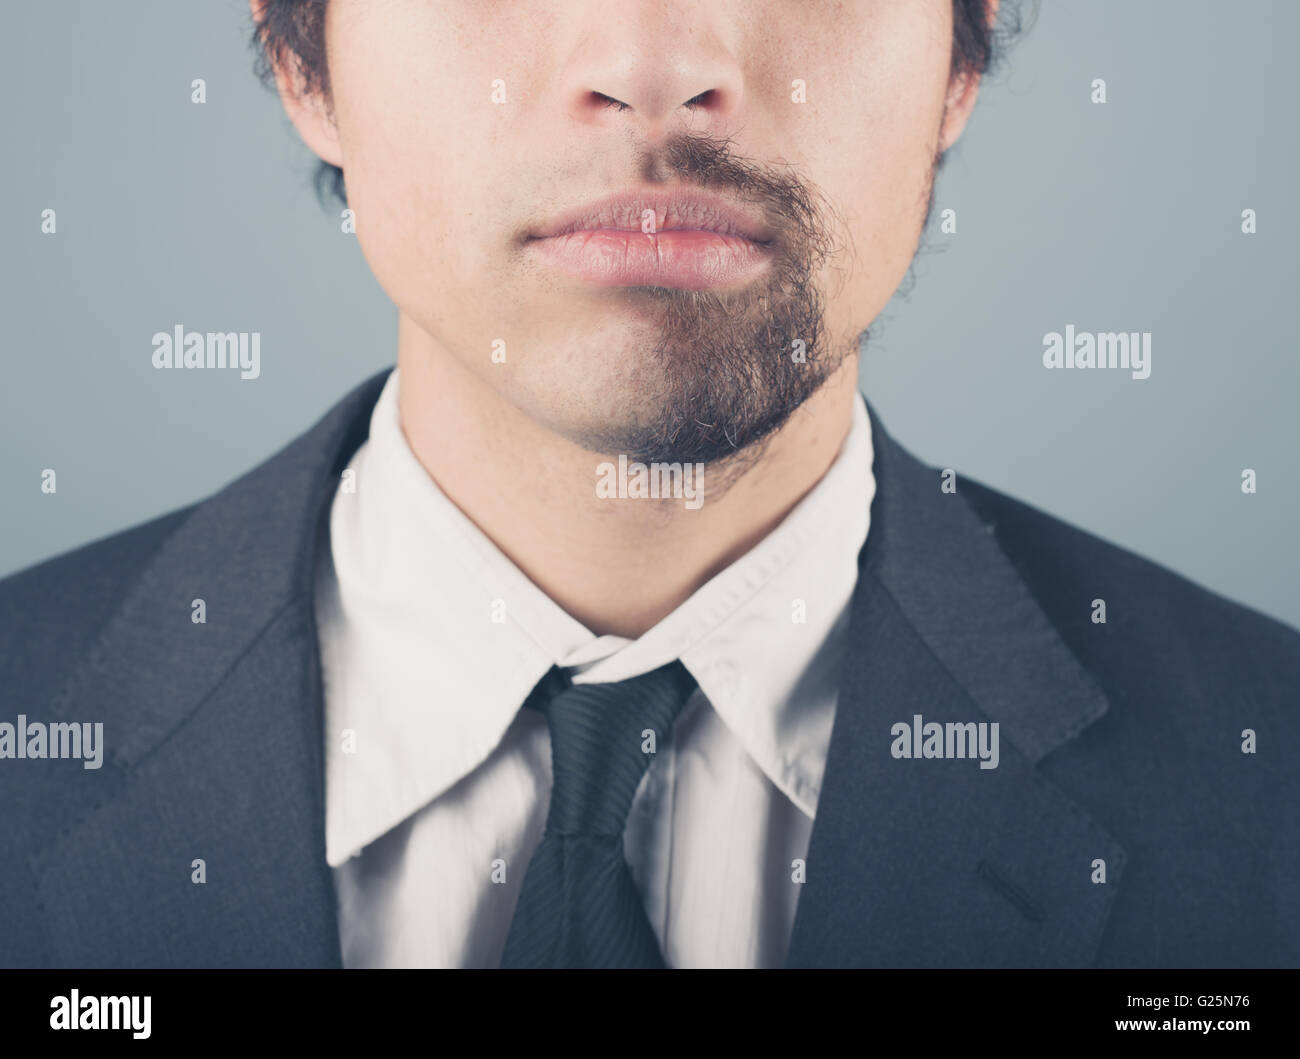 A young businessman with a half shaved beard Stock Photo